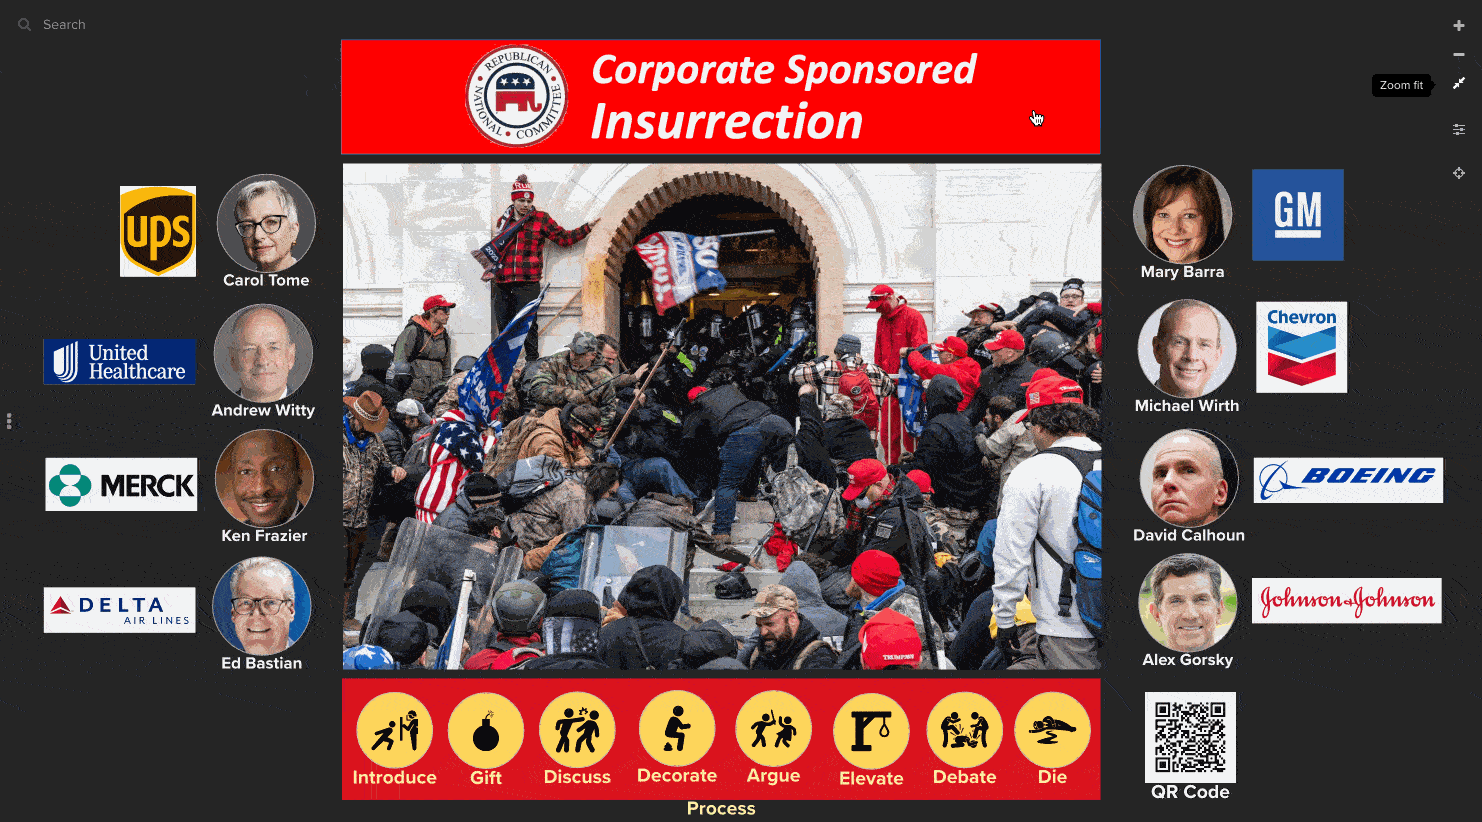 Corporations fund the Republican National Committee that refuses to condemn the violent insurrection that took place on Jan 6.